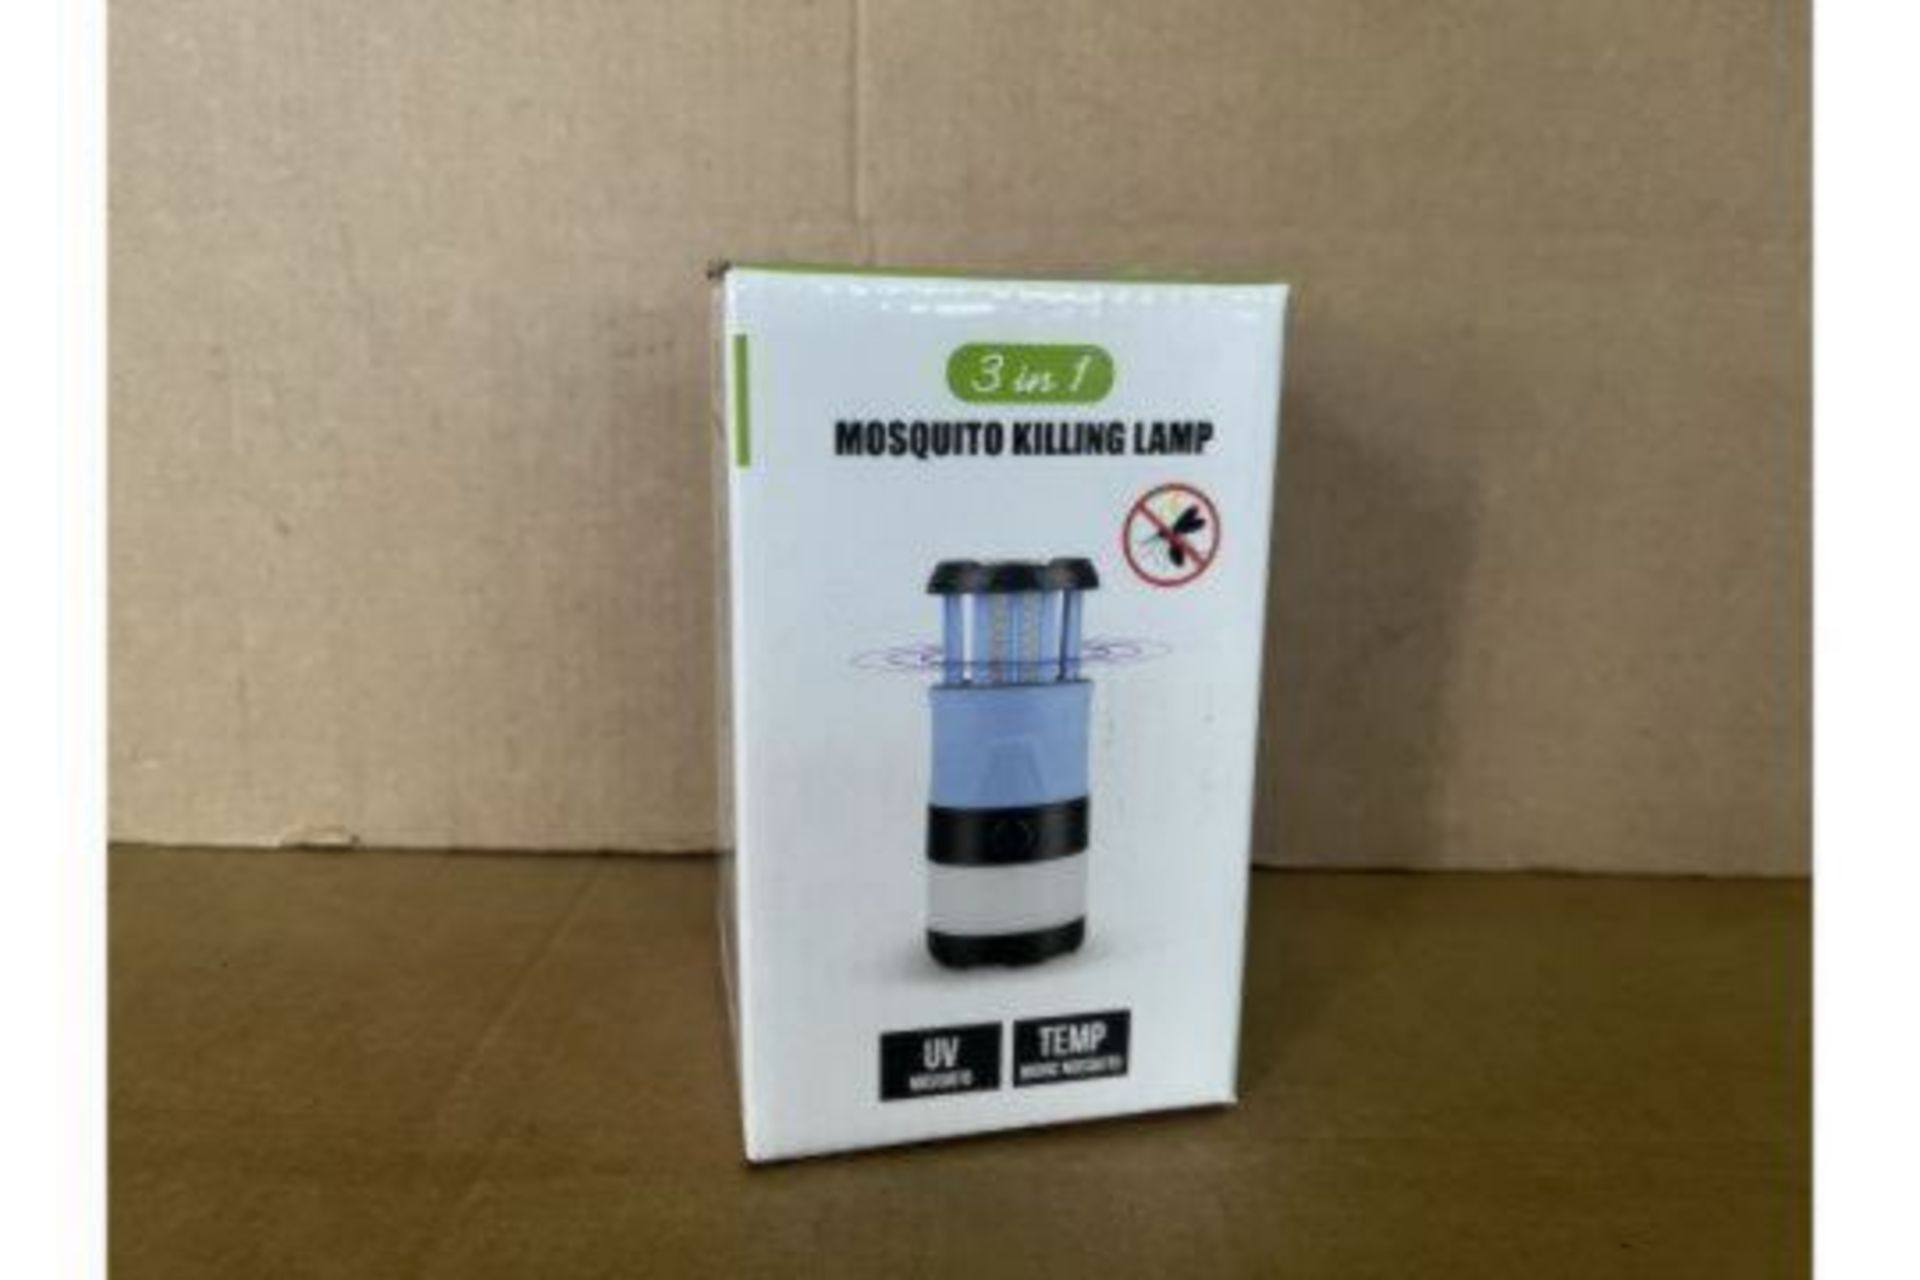 12 X BRAND NEW 3 IN 1 MOSQUITO KILLING CAMPING LAMPS, OUTDOOR LIGHTING, PURPLE LIGHT MOSQUITO